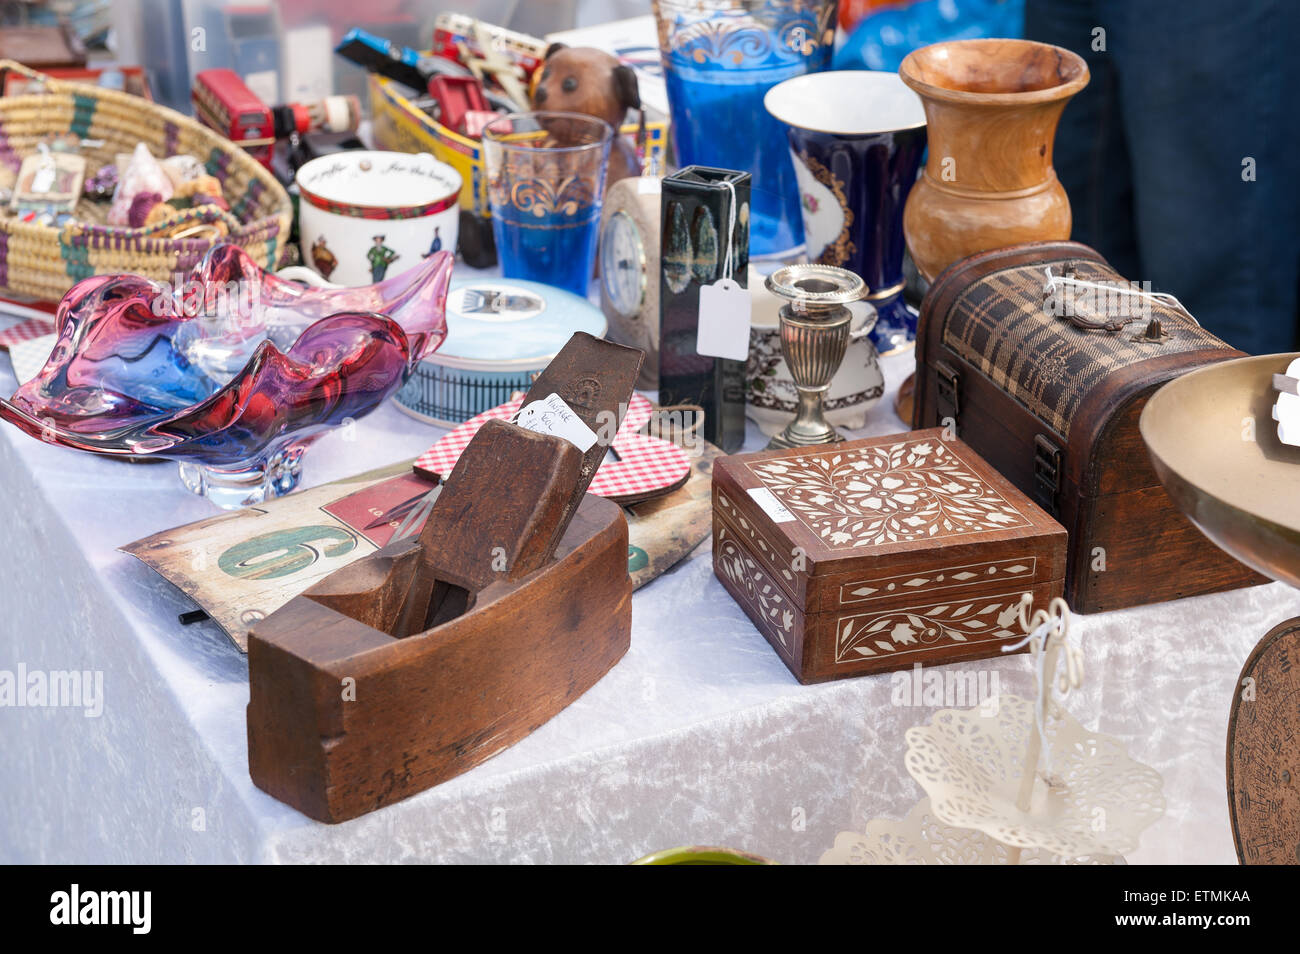 Typical display of household items for sale laid out on table at car boot fair nick knacks glasses jewelery glass wooden plane Stock Photo